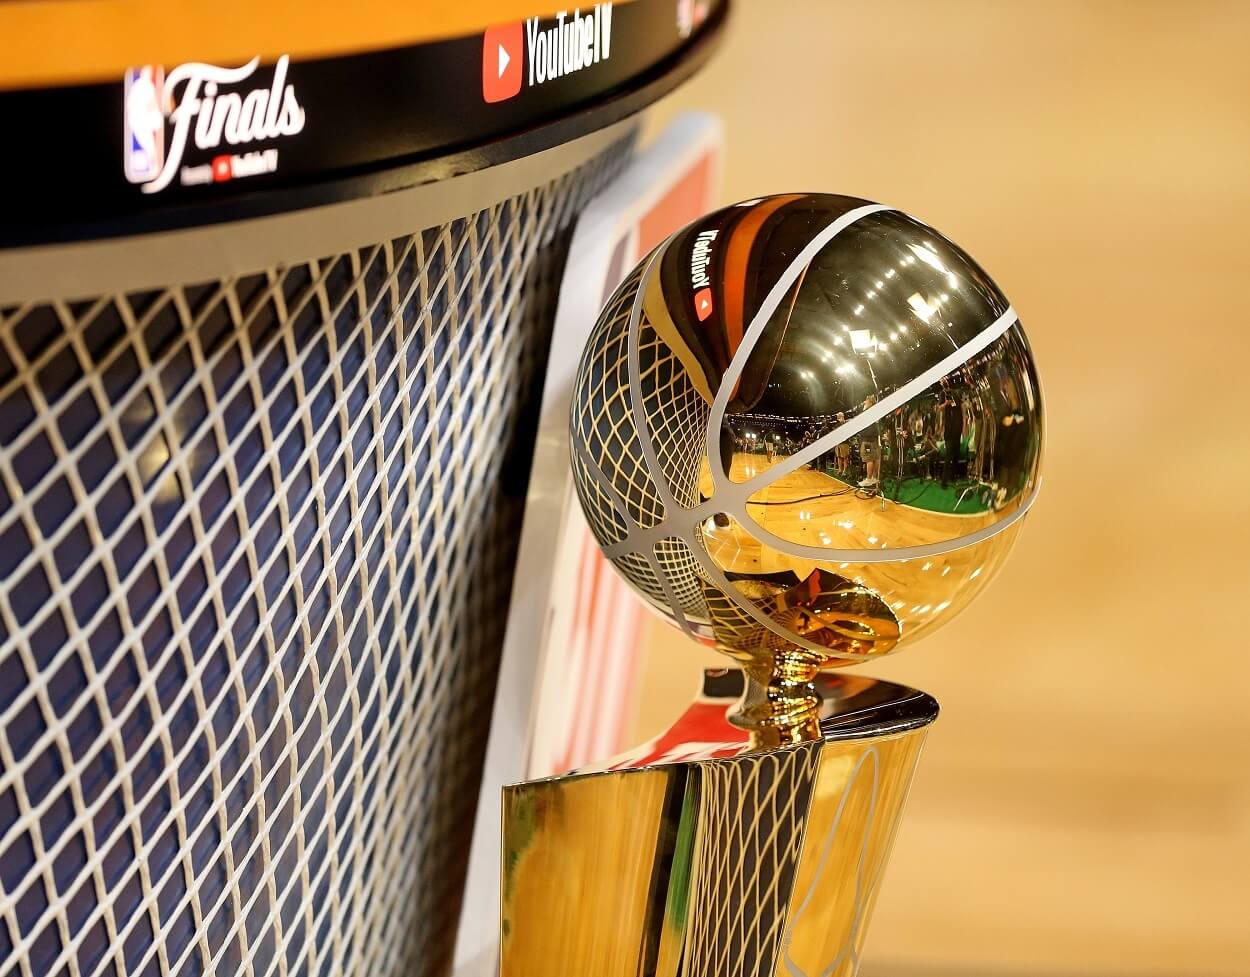 A general view of the NBA championship trophy